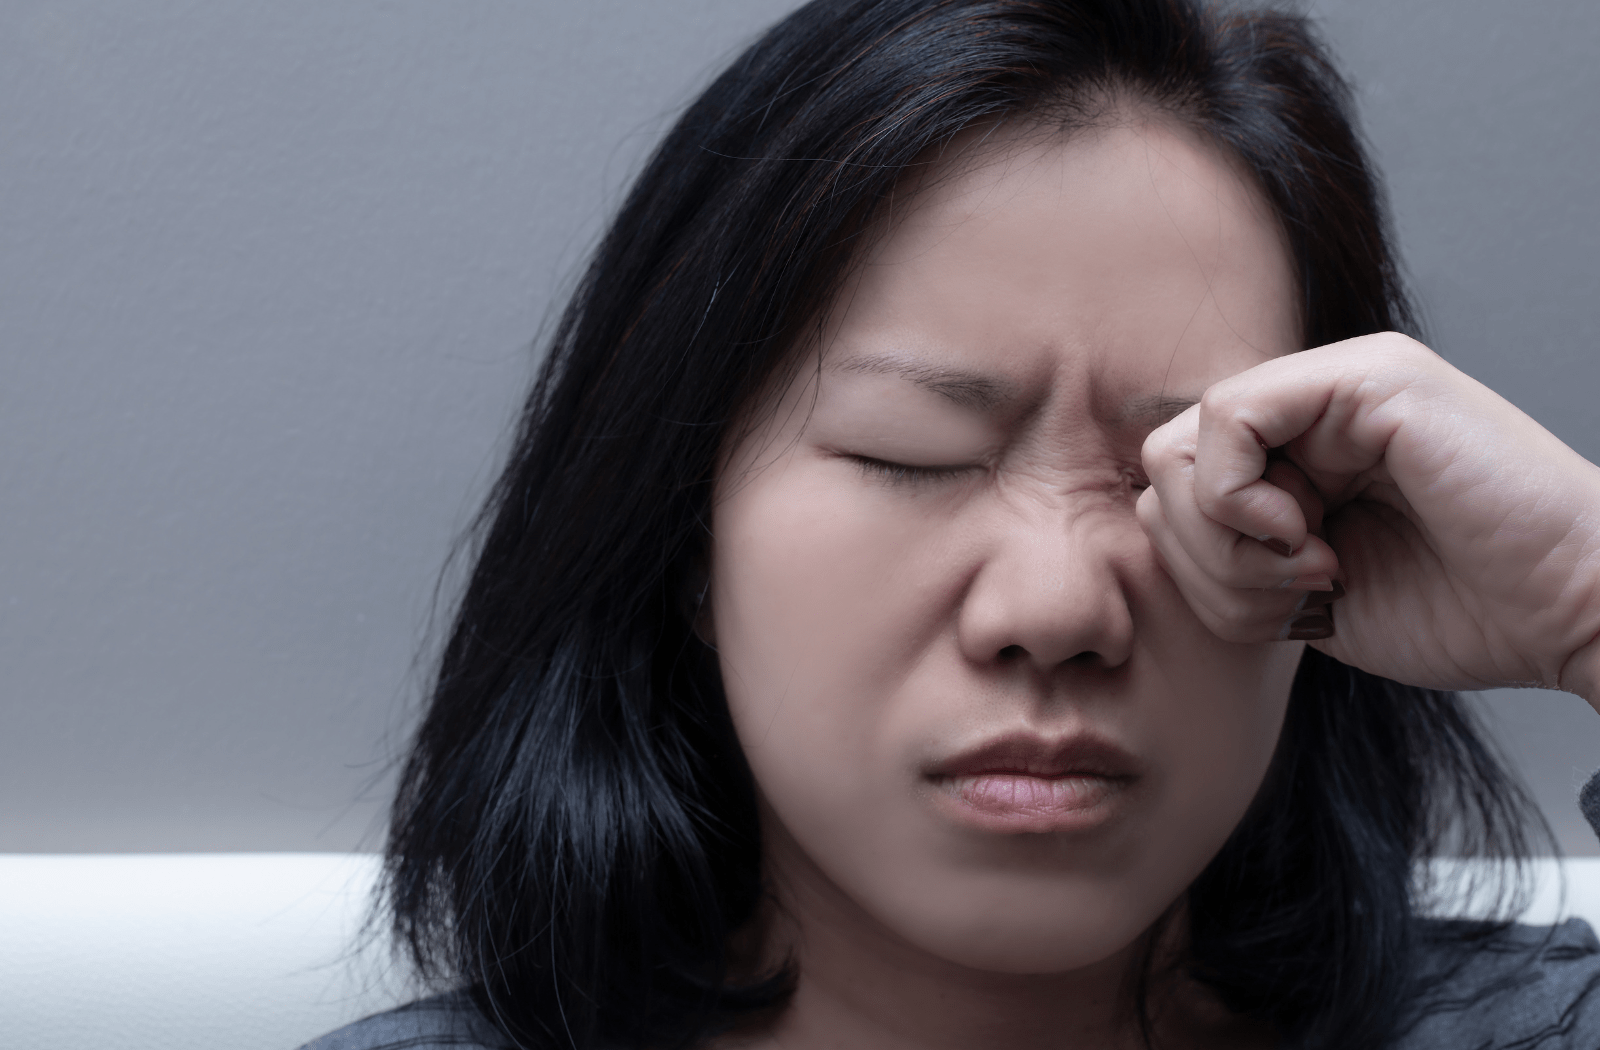 A woman rubbing her eyes due to dry eye